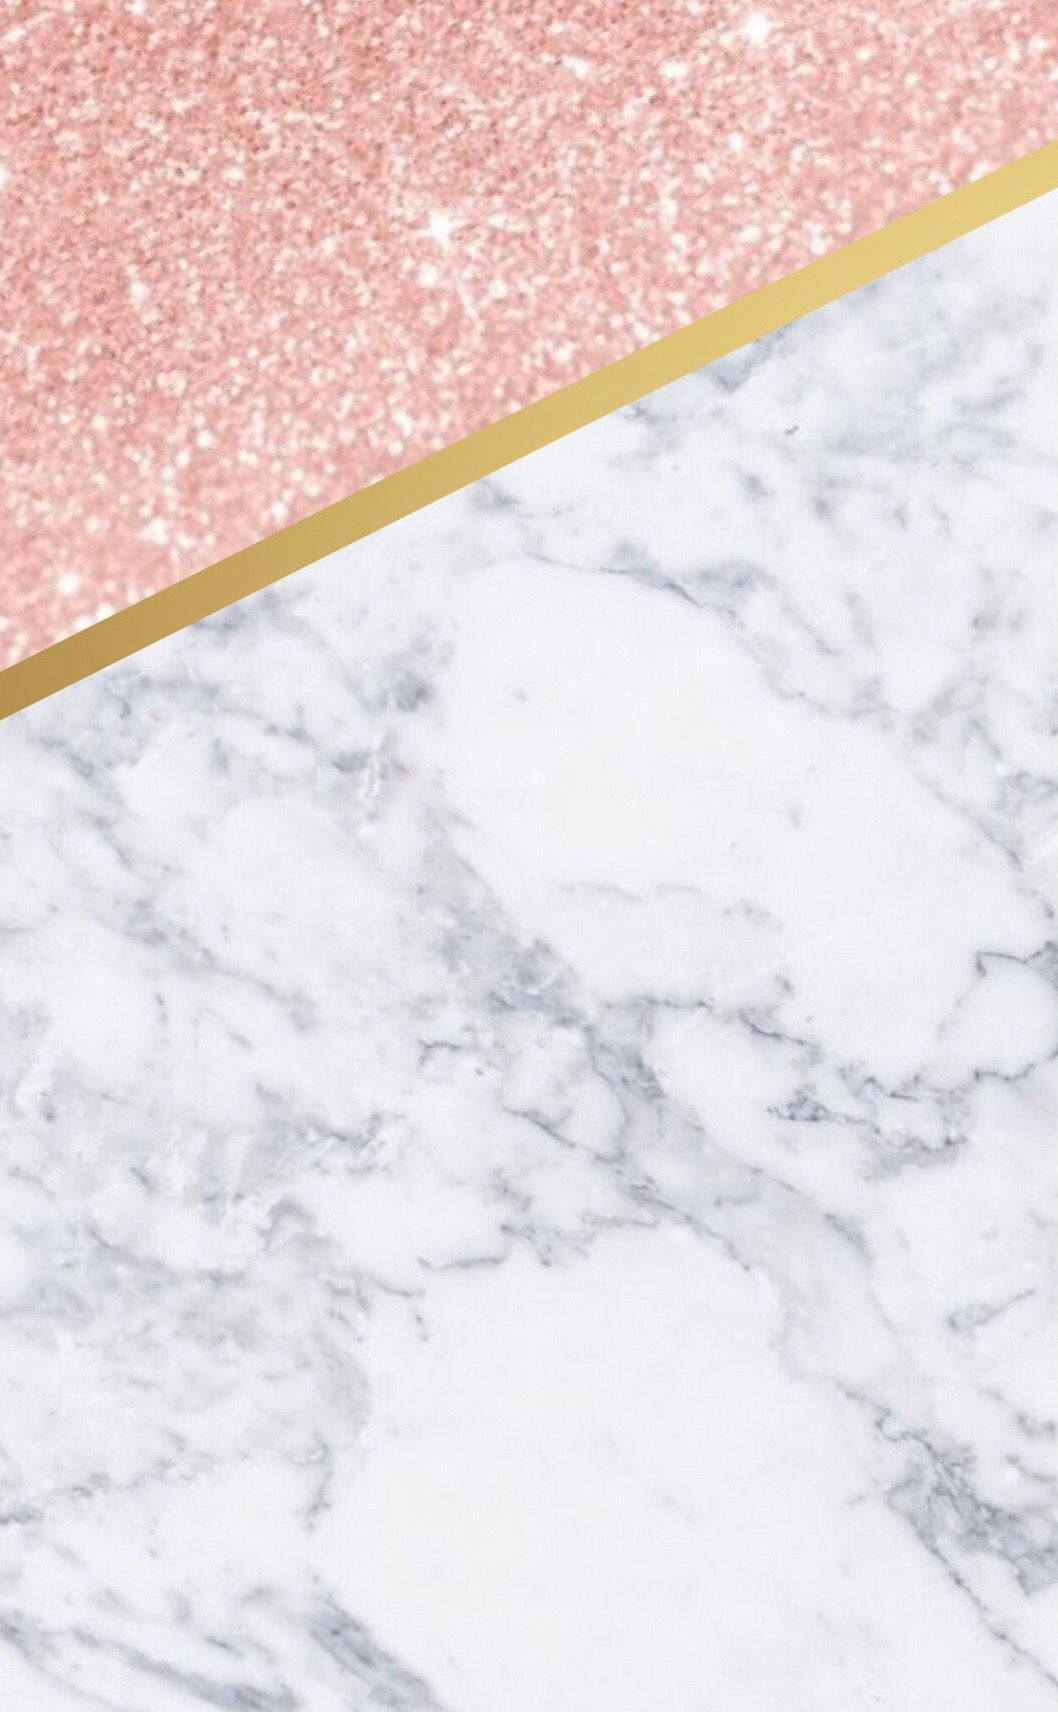 Caption: Luxurious Pink Gold Marble Texture Wallpaper